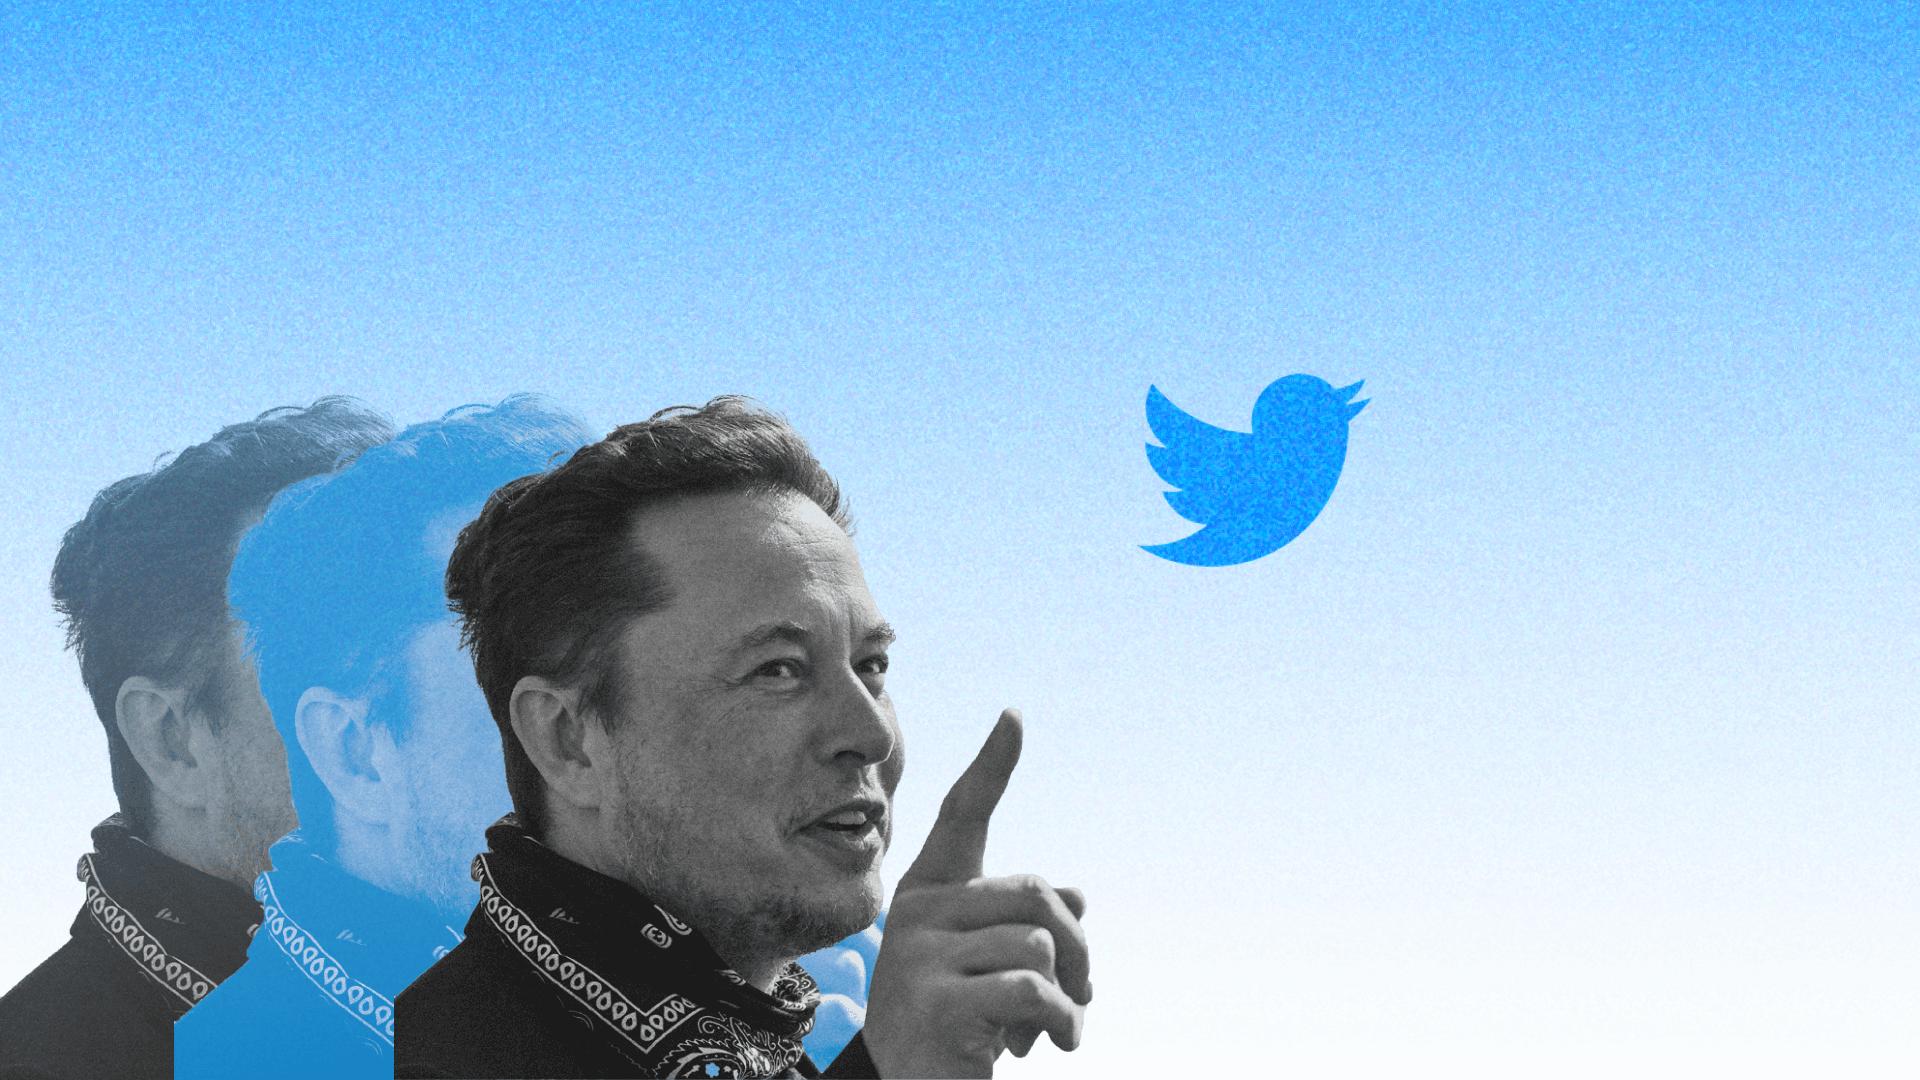 Twitter's board of directors recommends that shareholders vote in favor of the sale to Musk